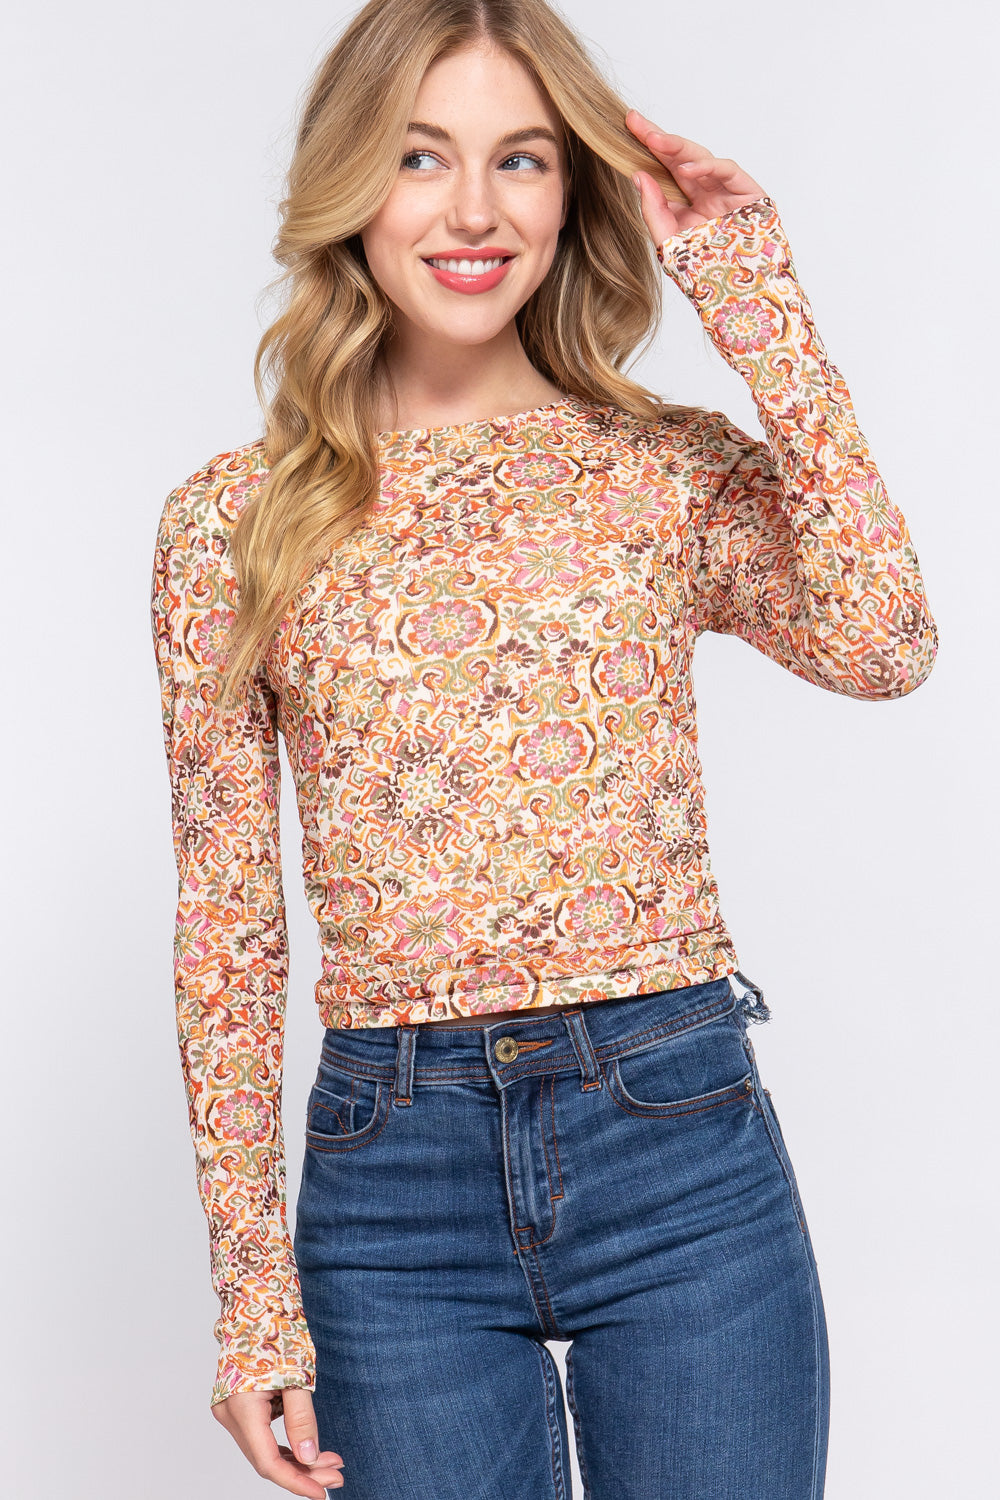 Ruched Printed Long Sleeve Top - Women’s Clothing & Accessories - Shirts & Tops - 4 - 2024